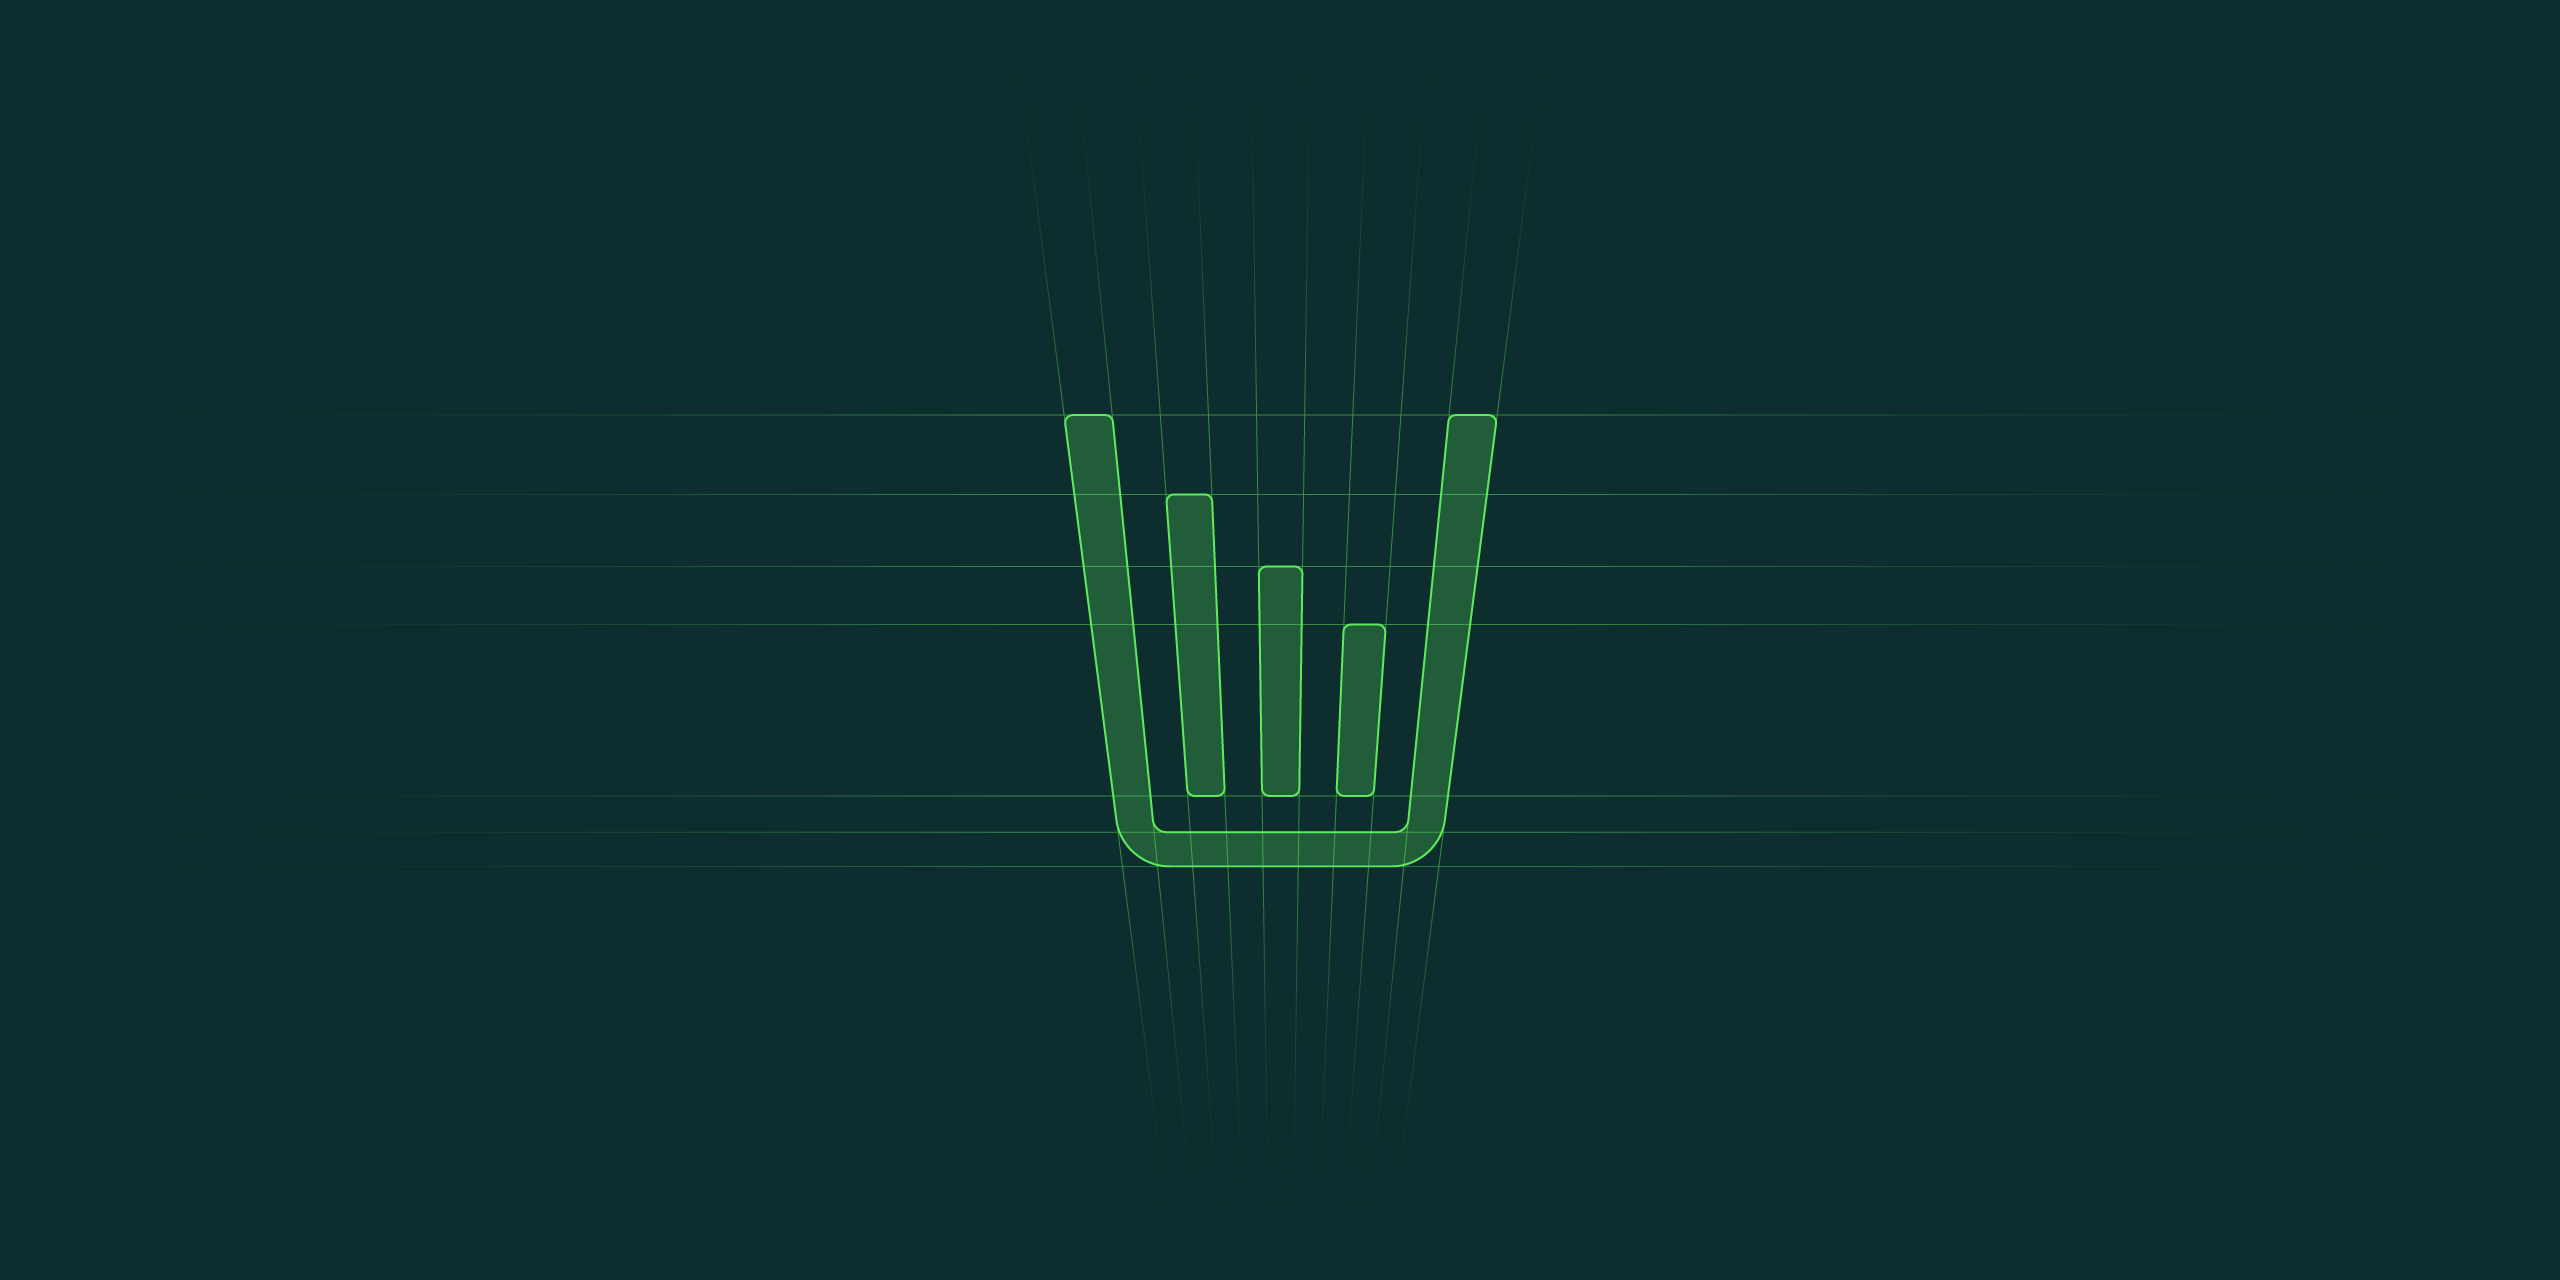 Construction grids of the WasteTracker logo, demonstrating the precision in its design.